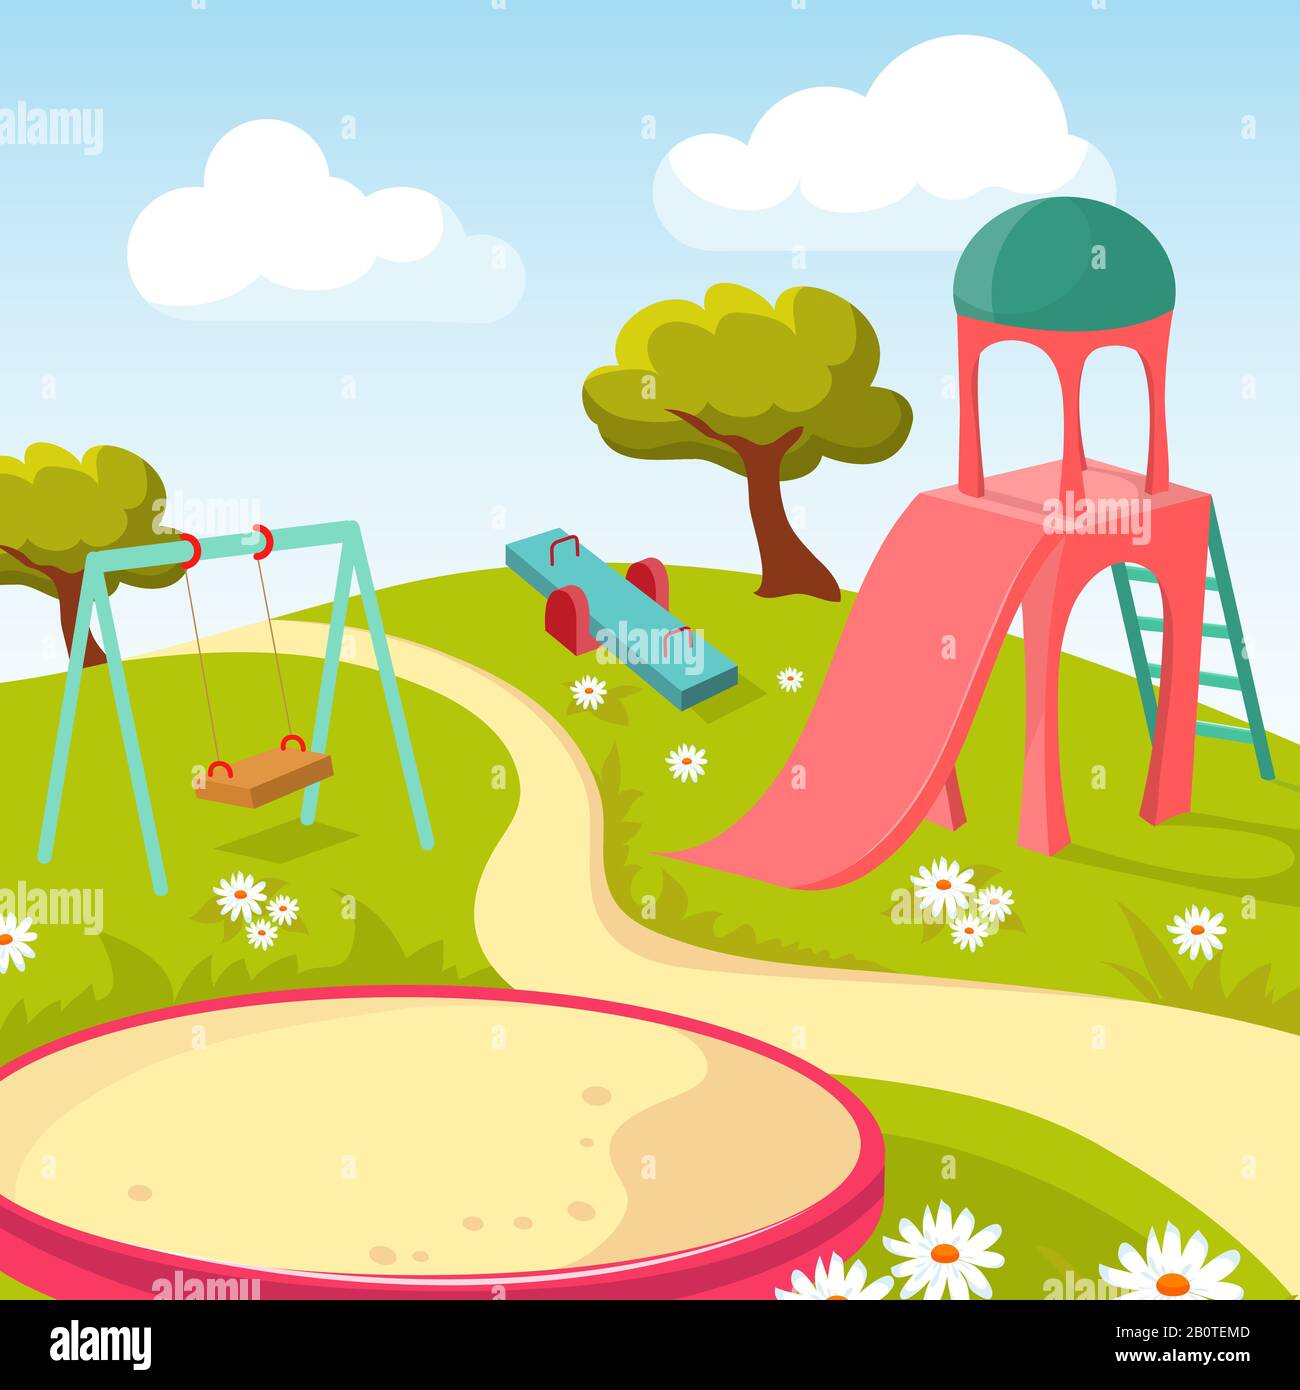 Recreation children park with play equipment vector illustration. Playground for game recreational Stock Vector